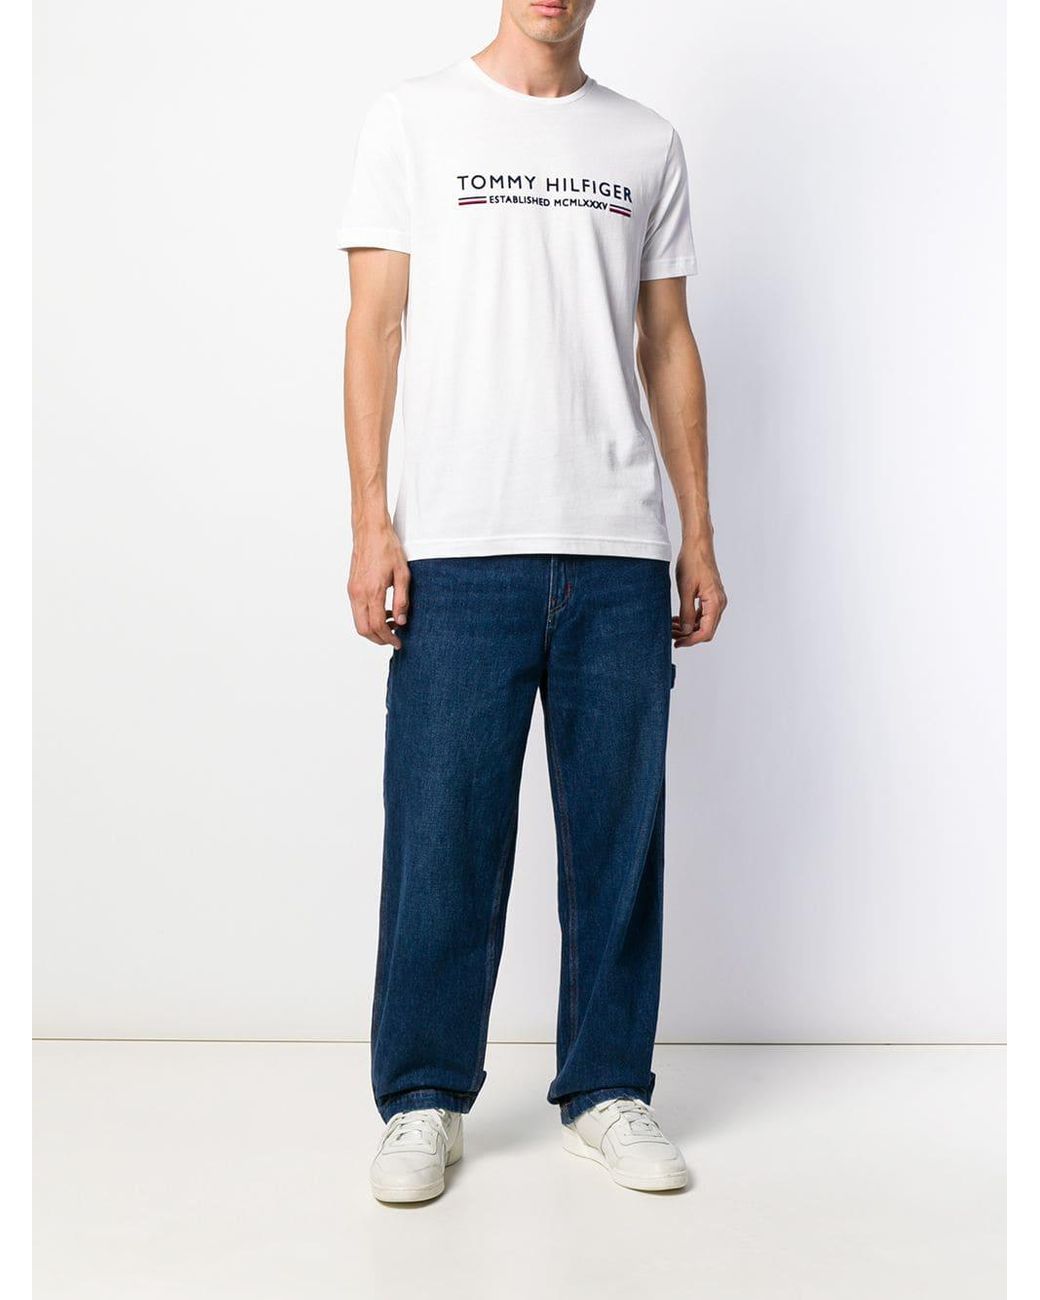 Tommy Hilfiger Cotton Mcmlxxxv T-shirt in White for Men | Lyst